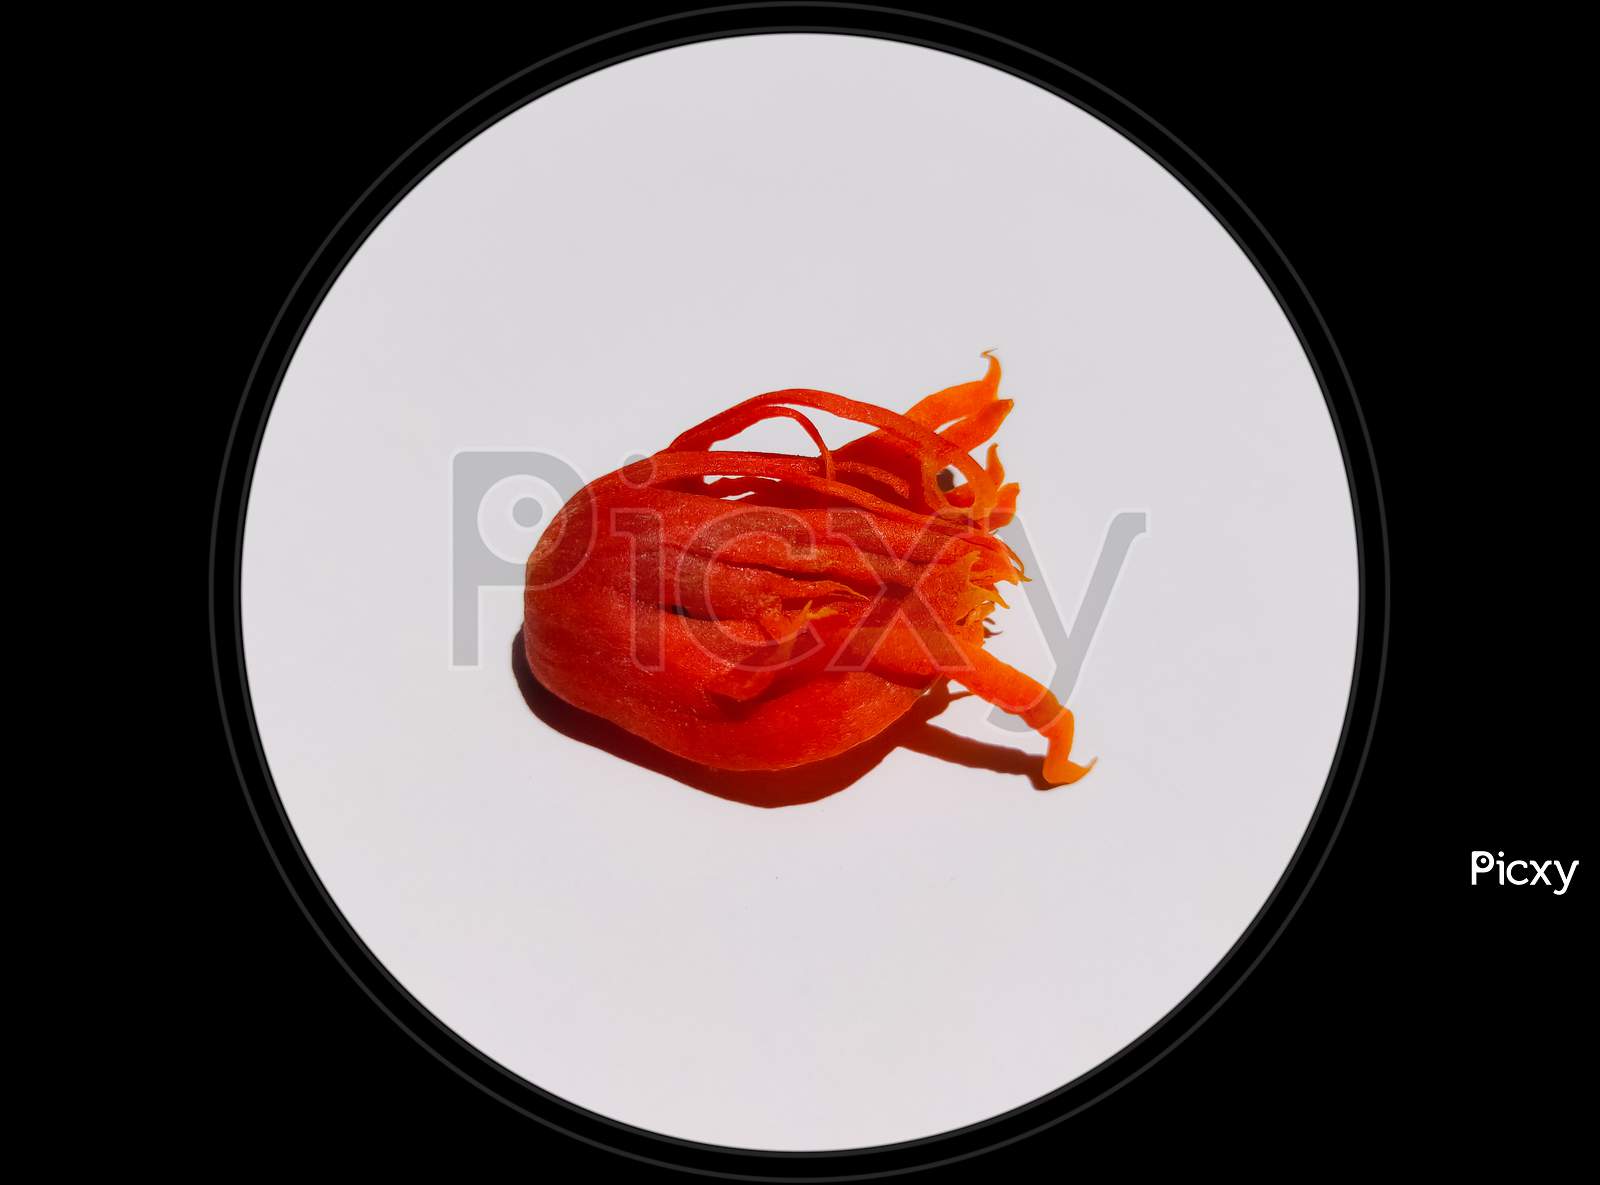 A concept pic of red maze spice isolated in white background surrounded by black circular border